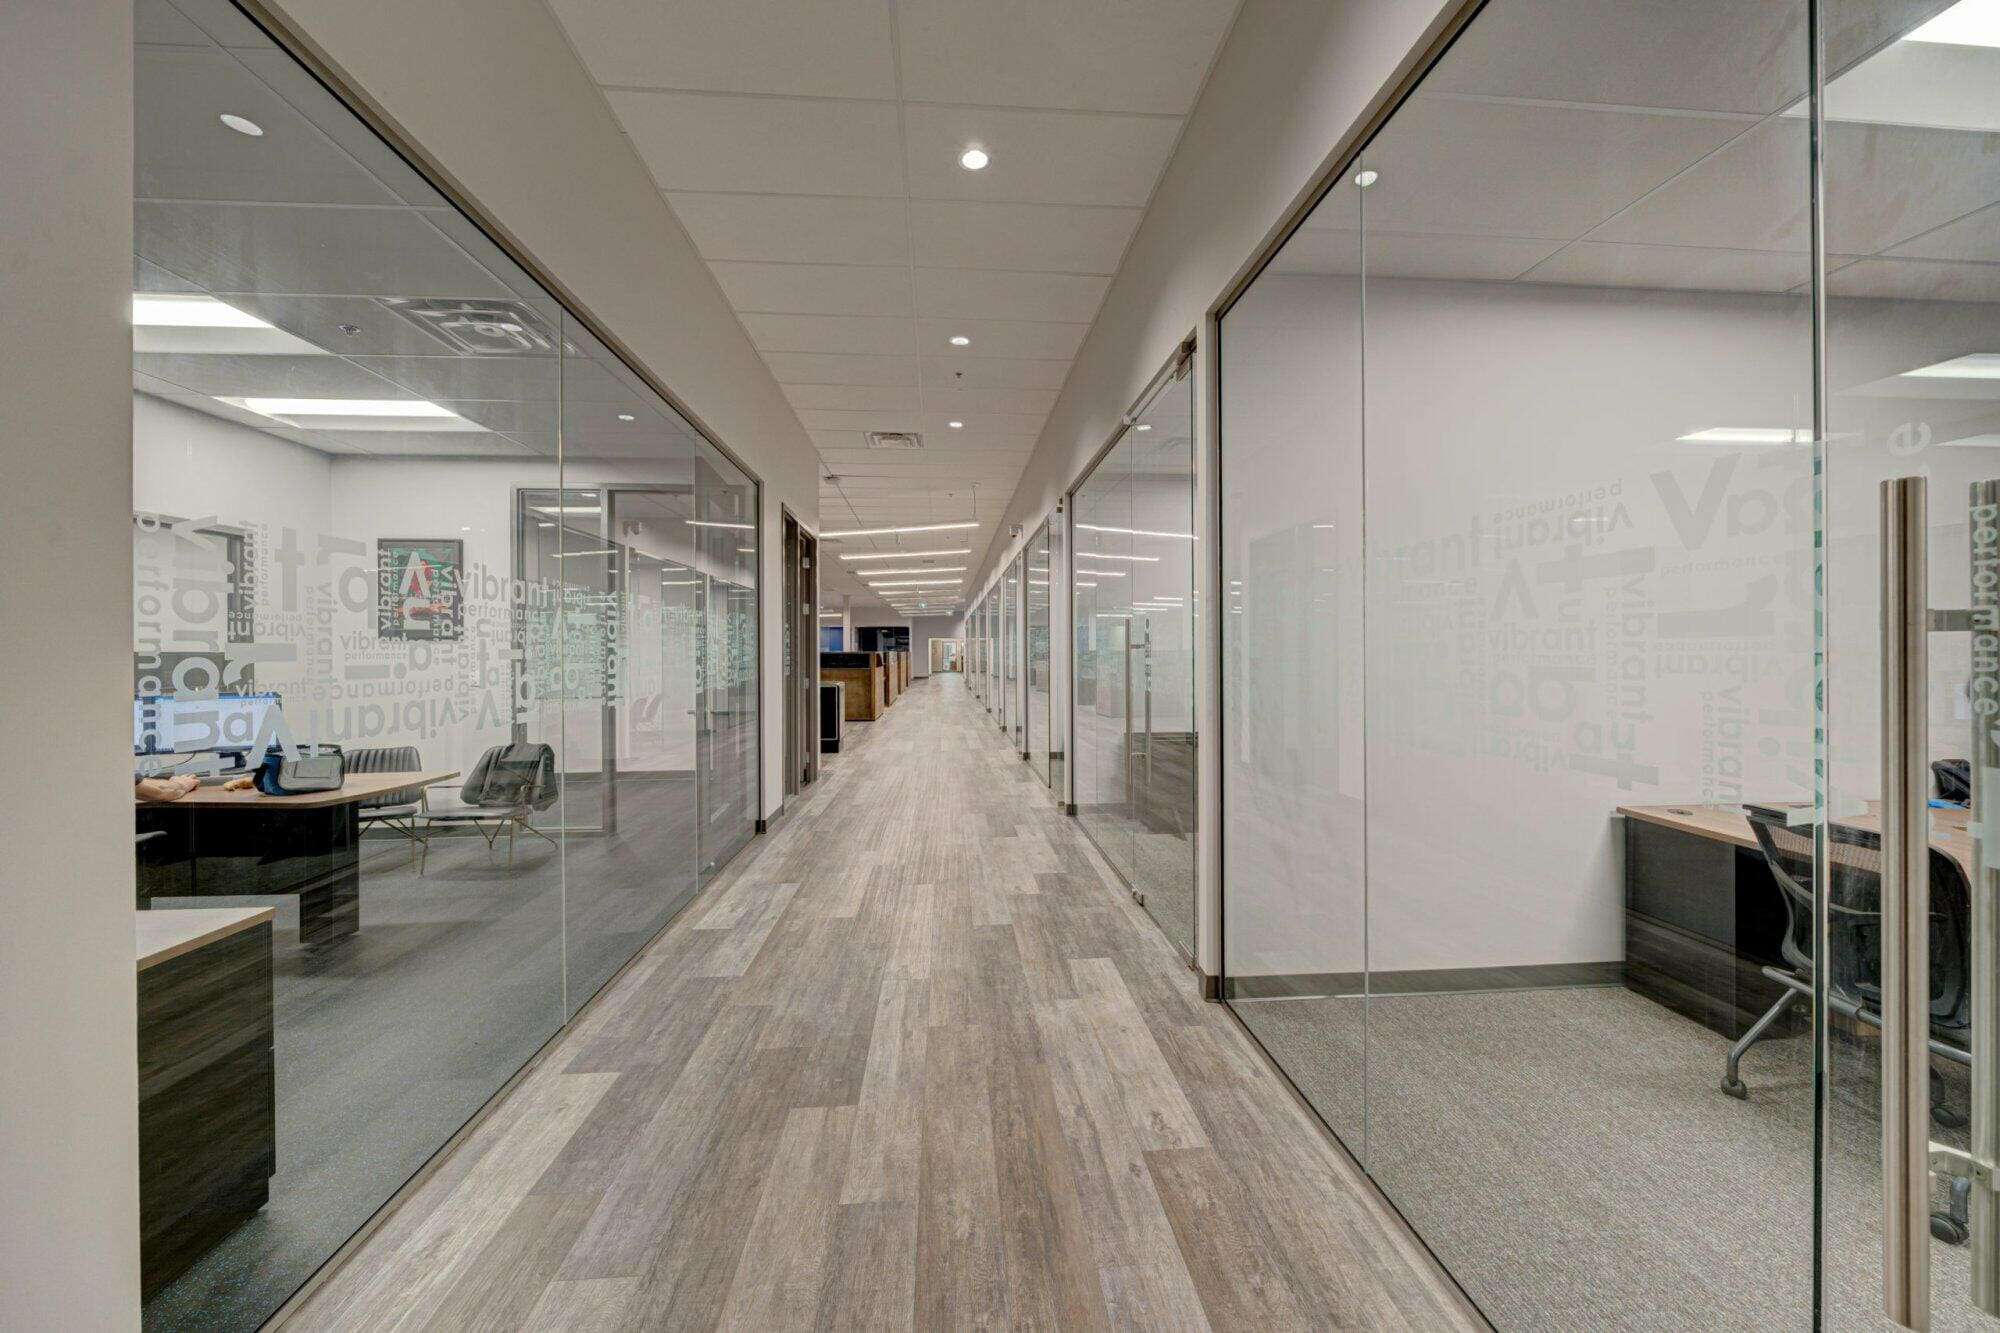 An image of a hallway with grey wood flooring and glass walls